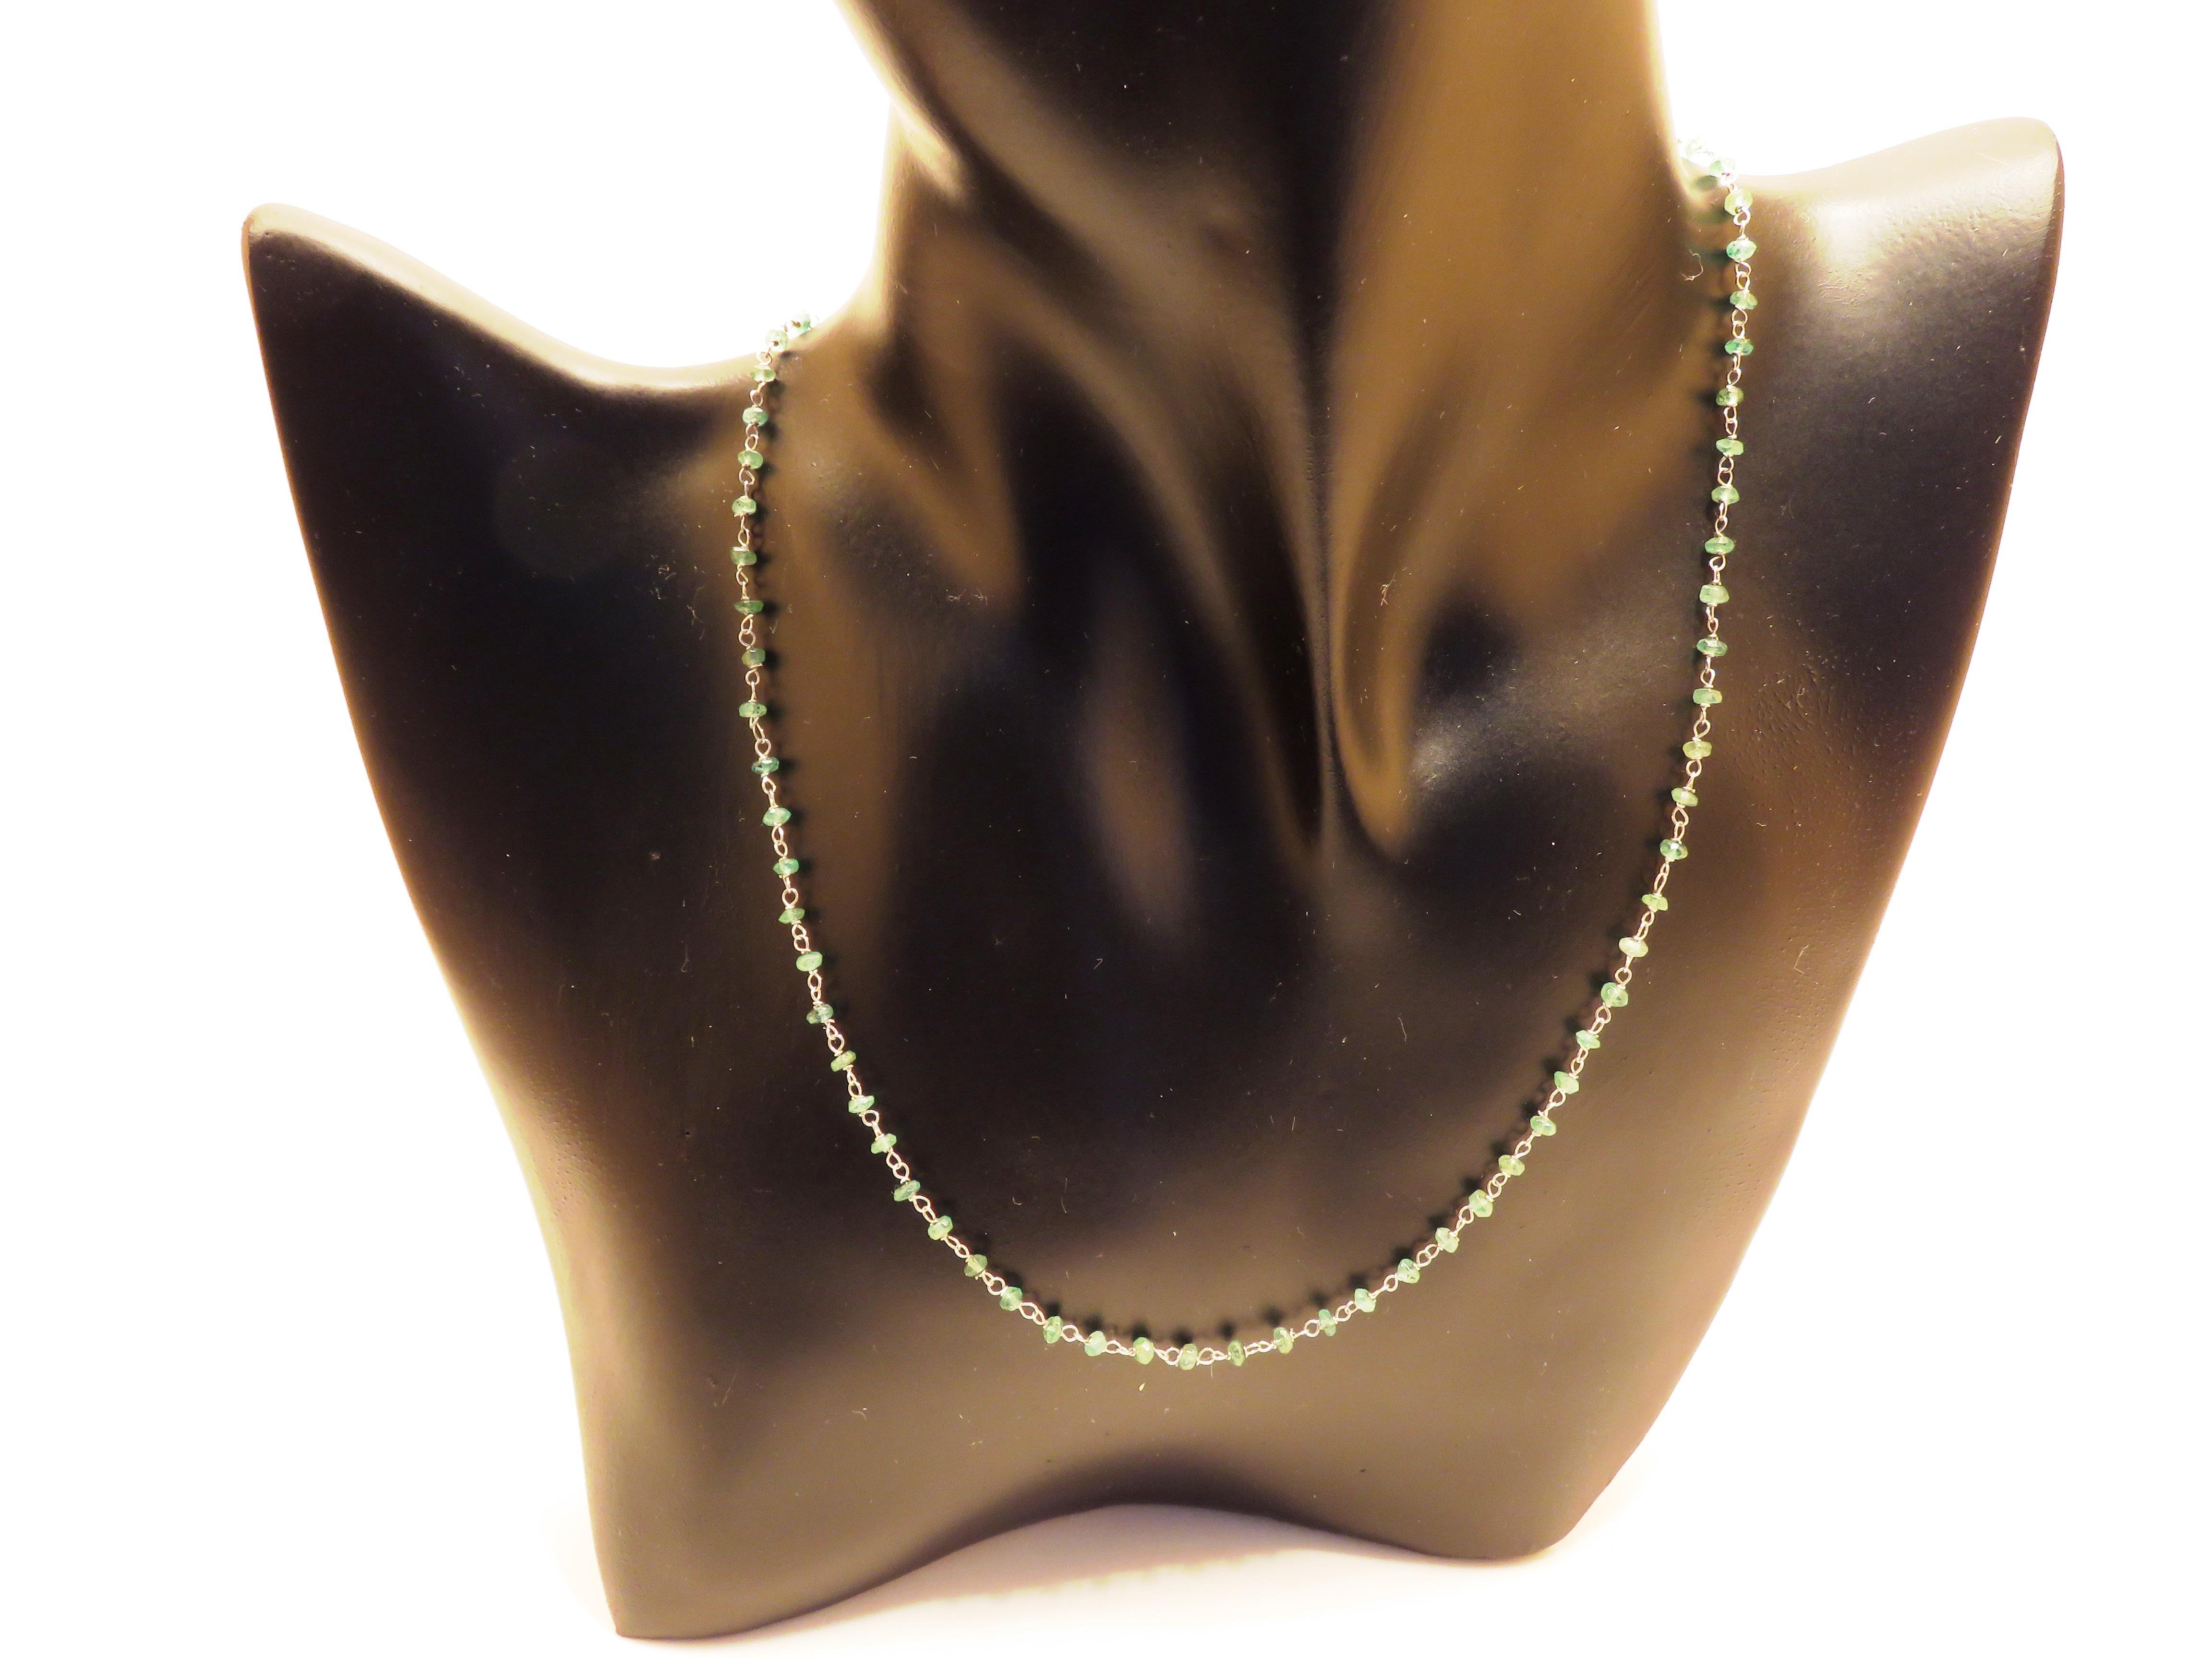 Contemporary Emerald White Gold Necklace Handcrafted in Italy by Botta Gioielli